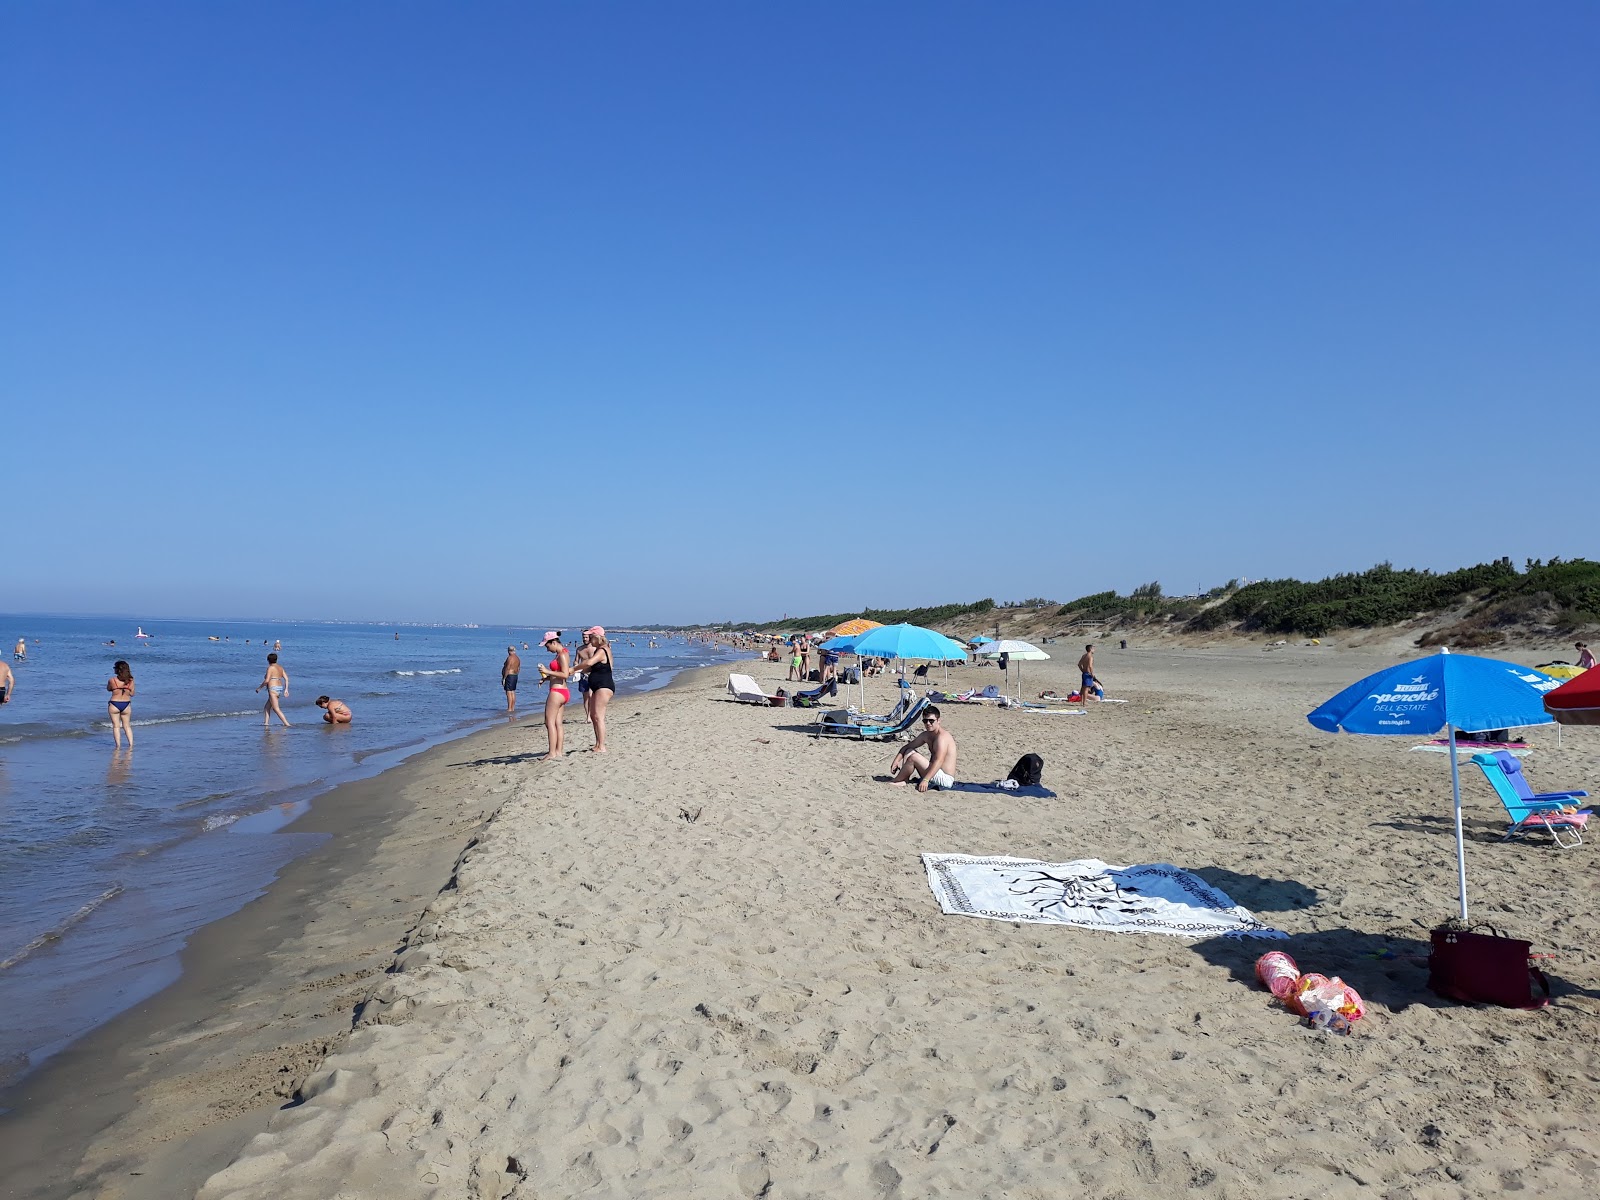 Photo of Spiaggia Sabaudia with long straight shore